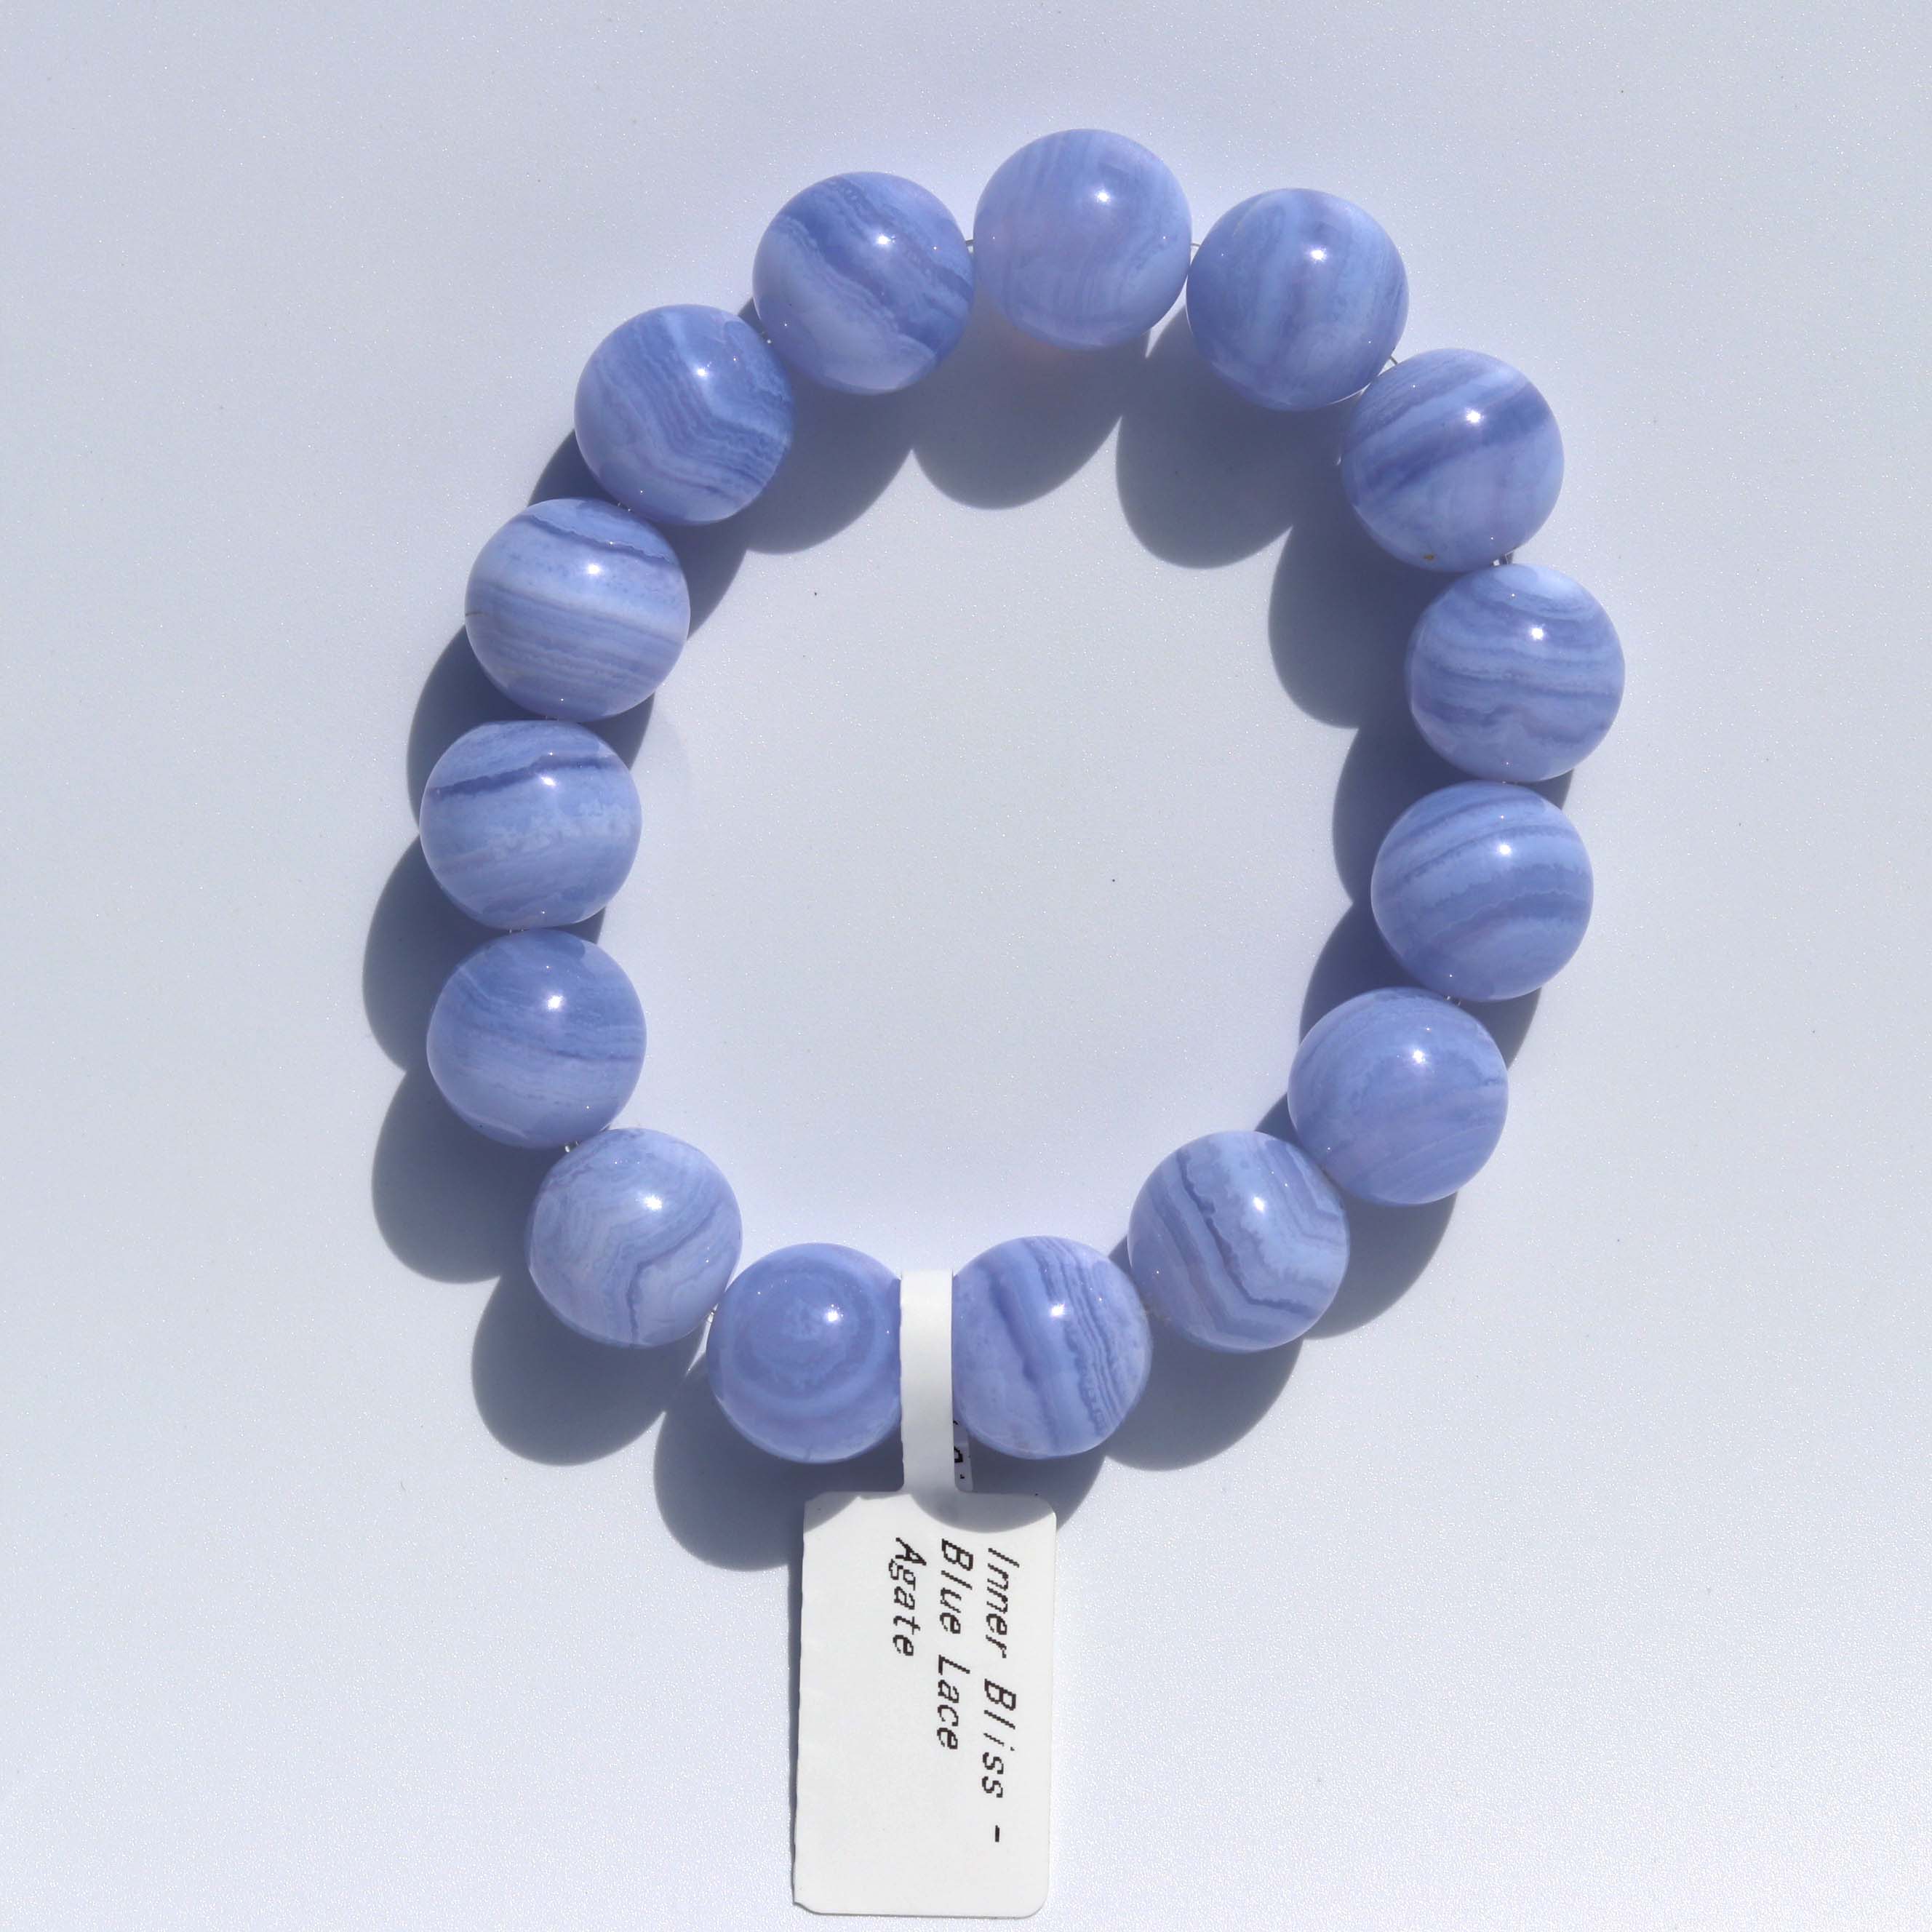 Blue Lace Agate | Stretchy Cord Healing Crystal Bracelet | The Stone of Tranquility | Choose Preferred Bead & Wrist Size